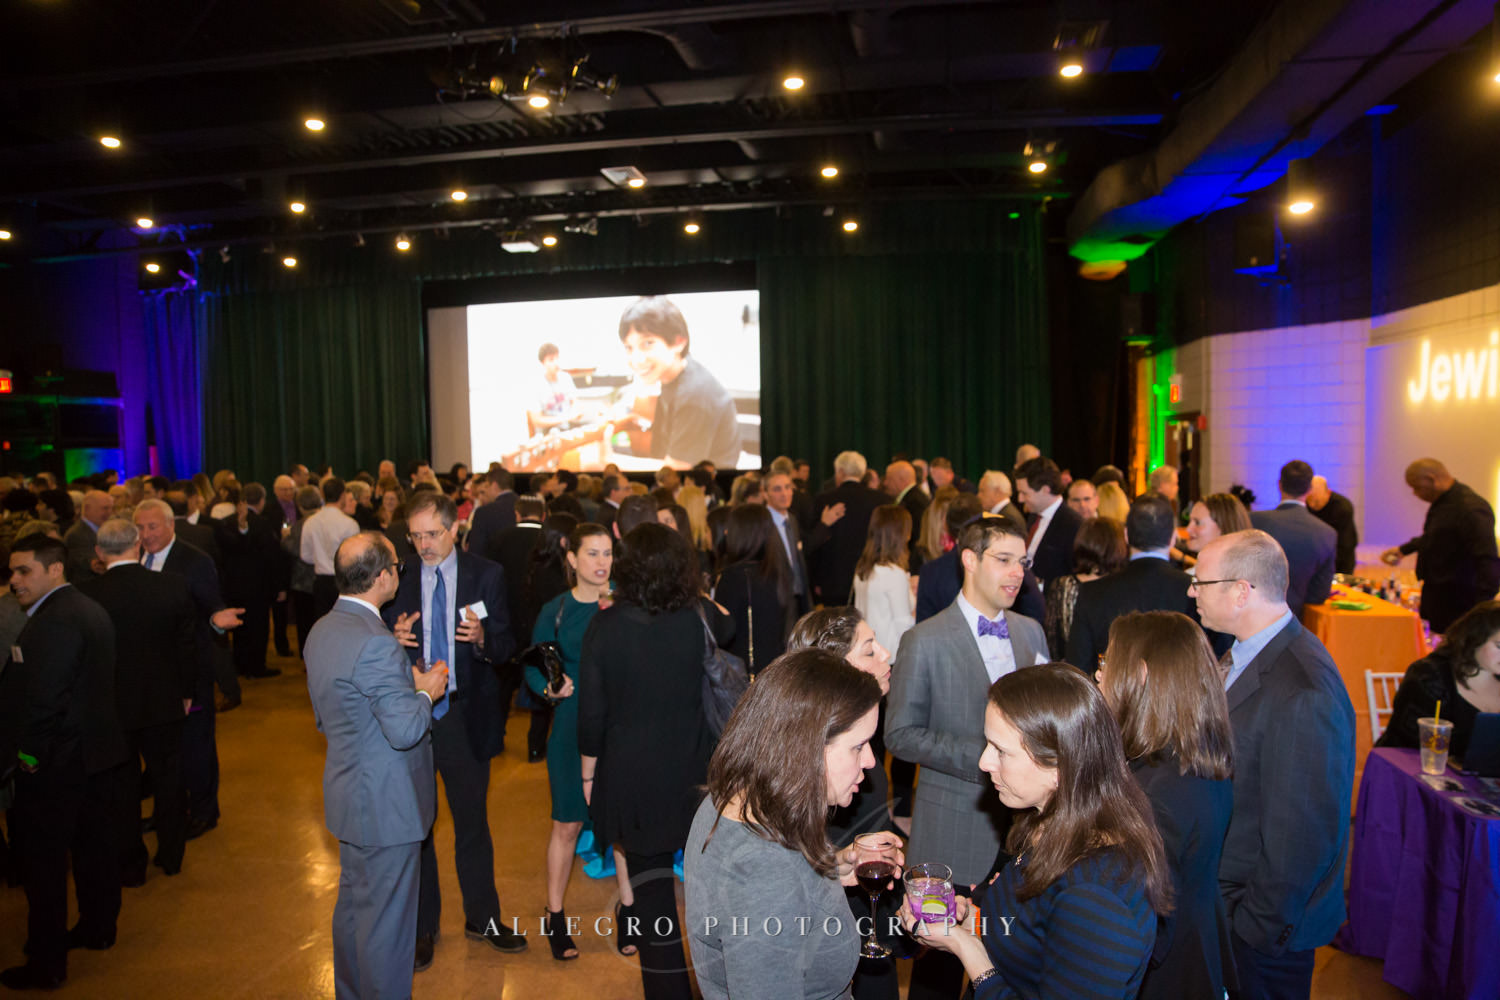 Guests mingling at nonprofit event shot by Allegro Photography